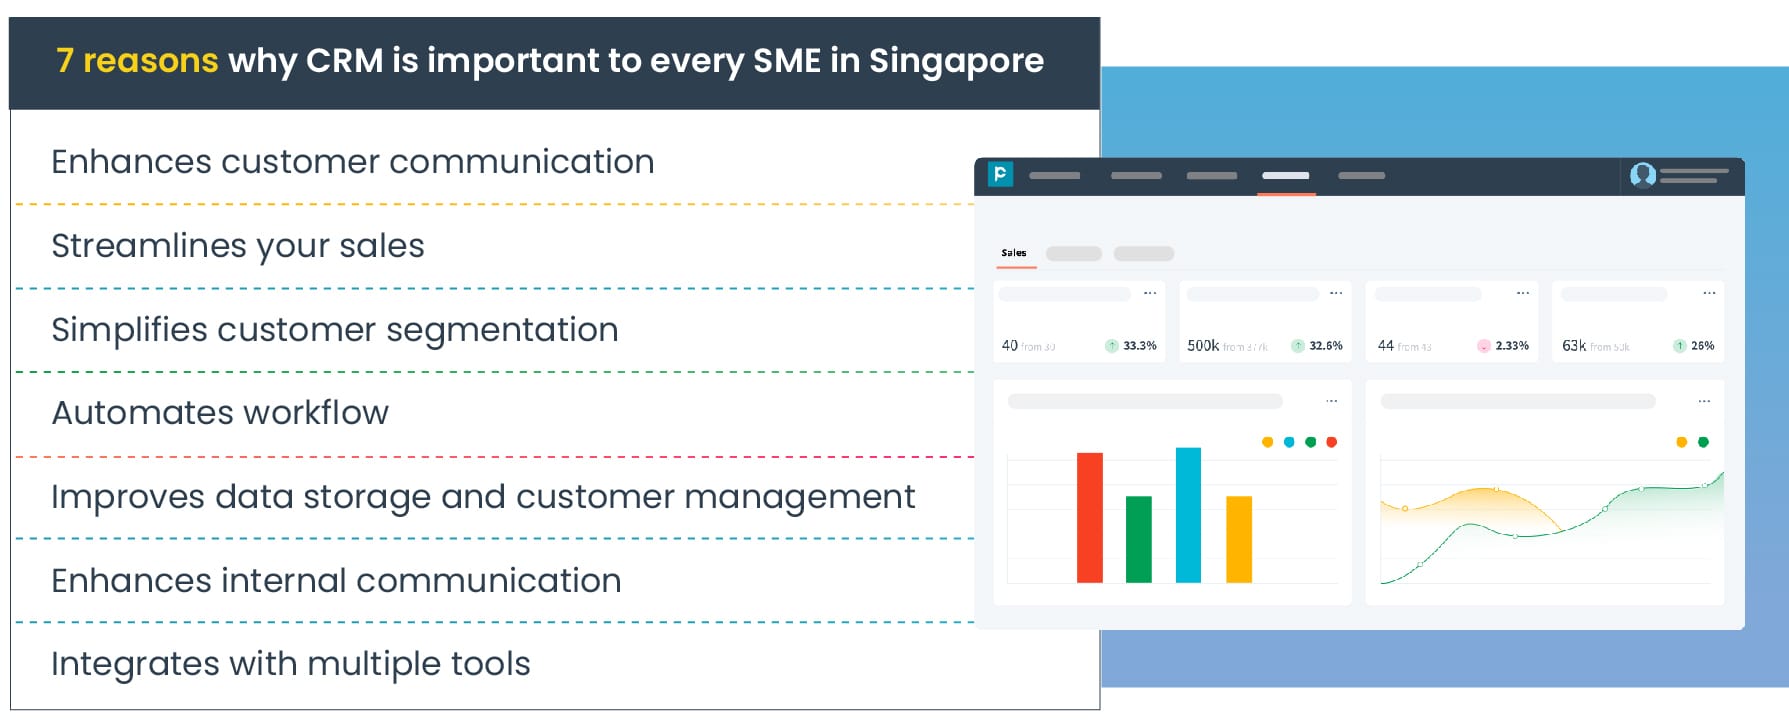 7 reasons why CRM is important to every SME in Singapore